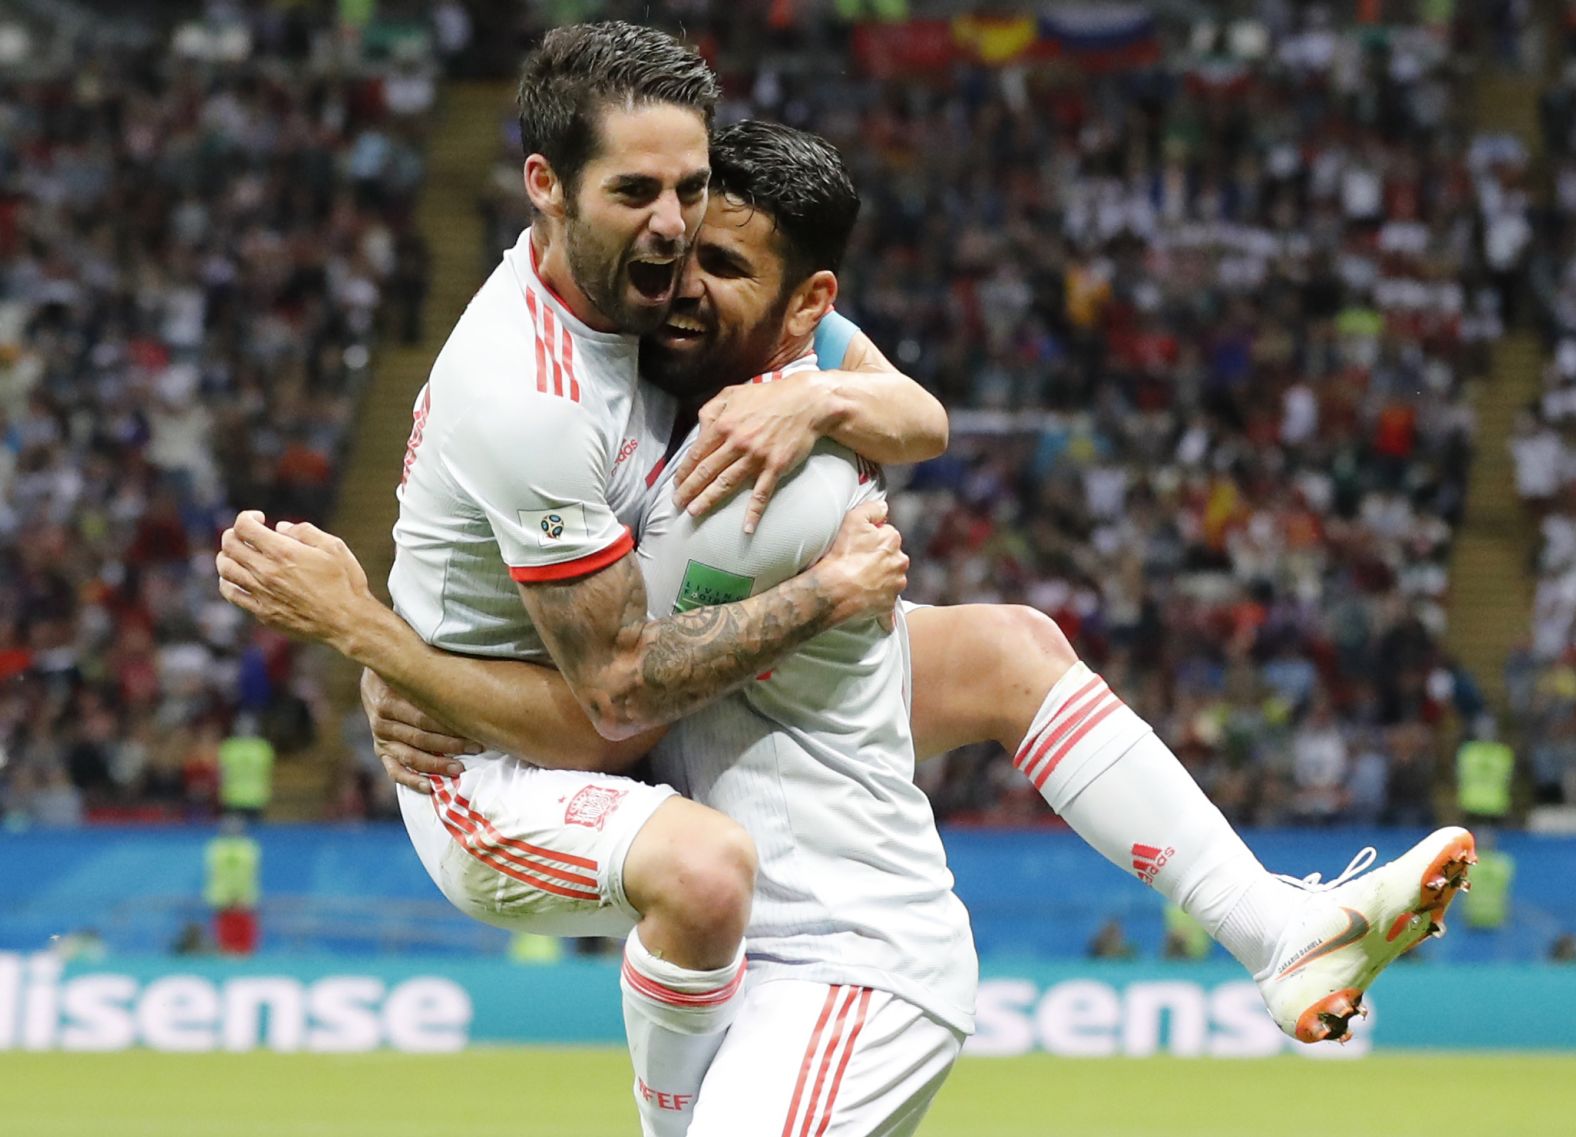 Spain's Diego Costa, right, celebrates with teammate Isco after scoring against Iran on June 20. Spain won 1-0.